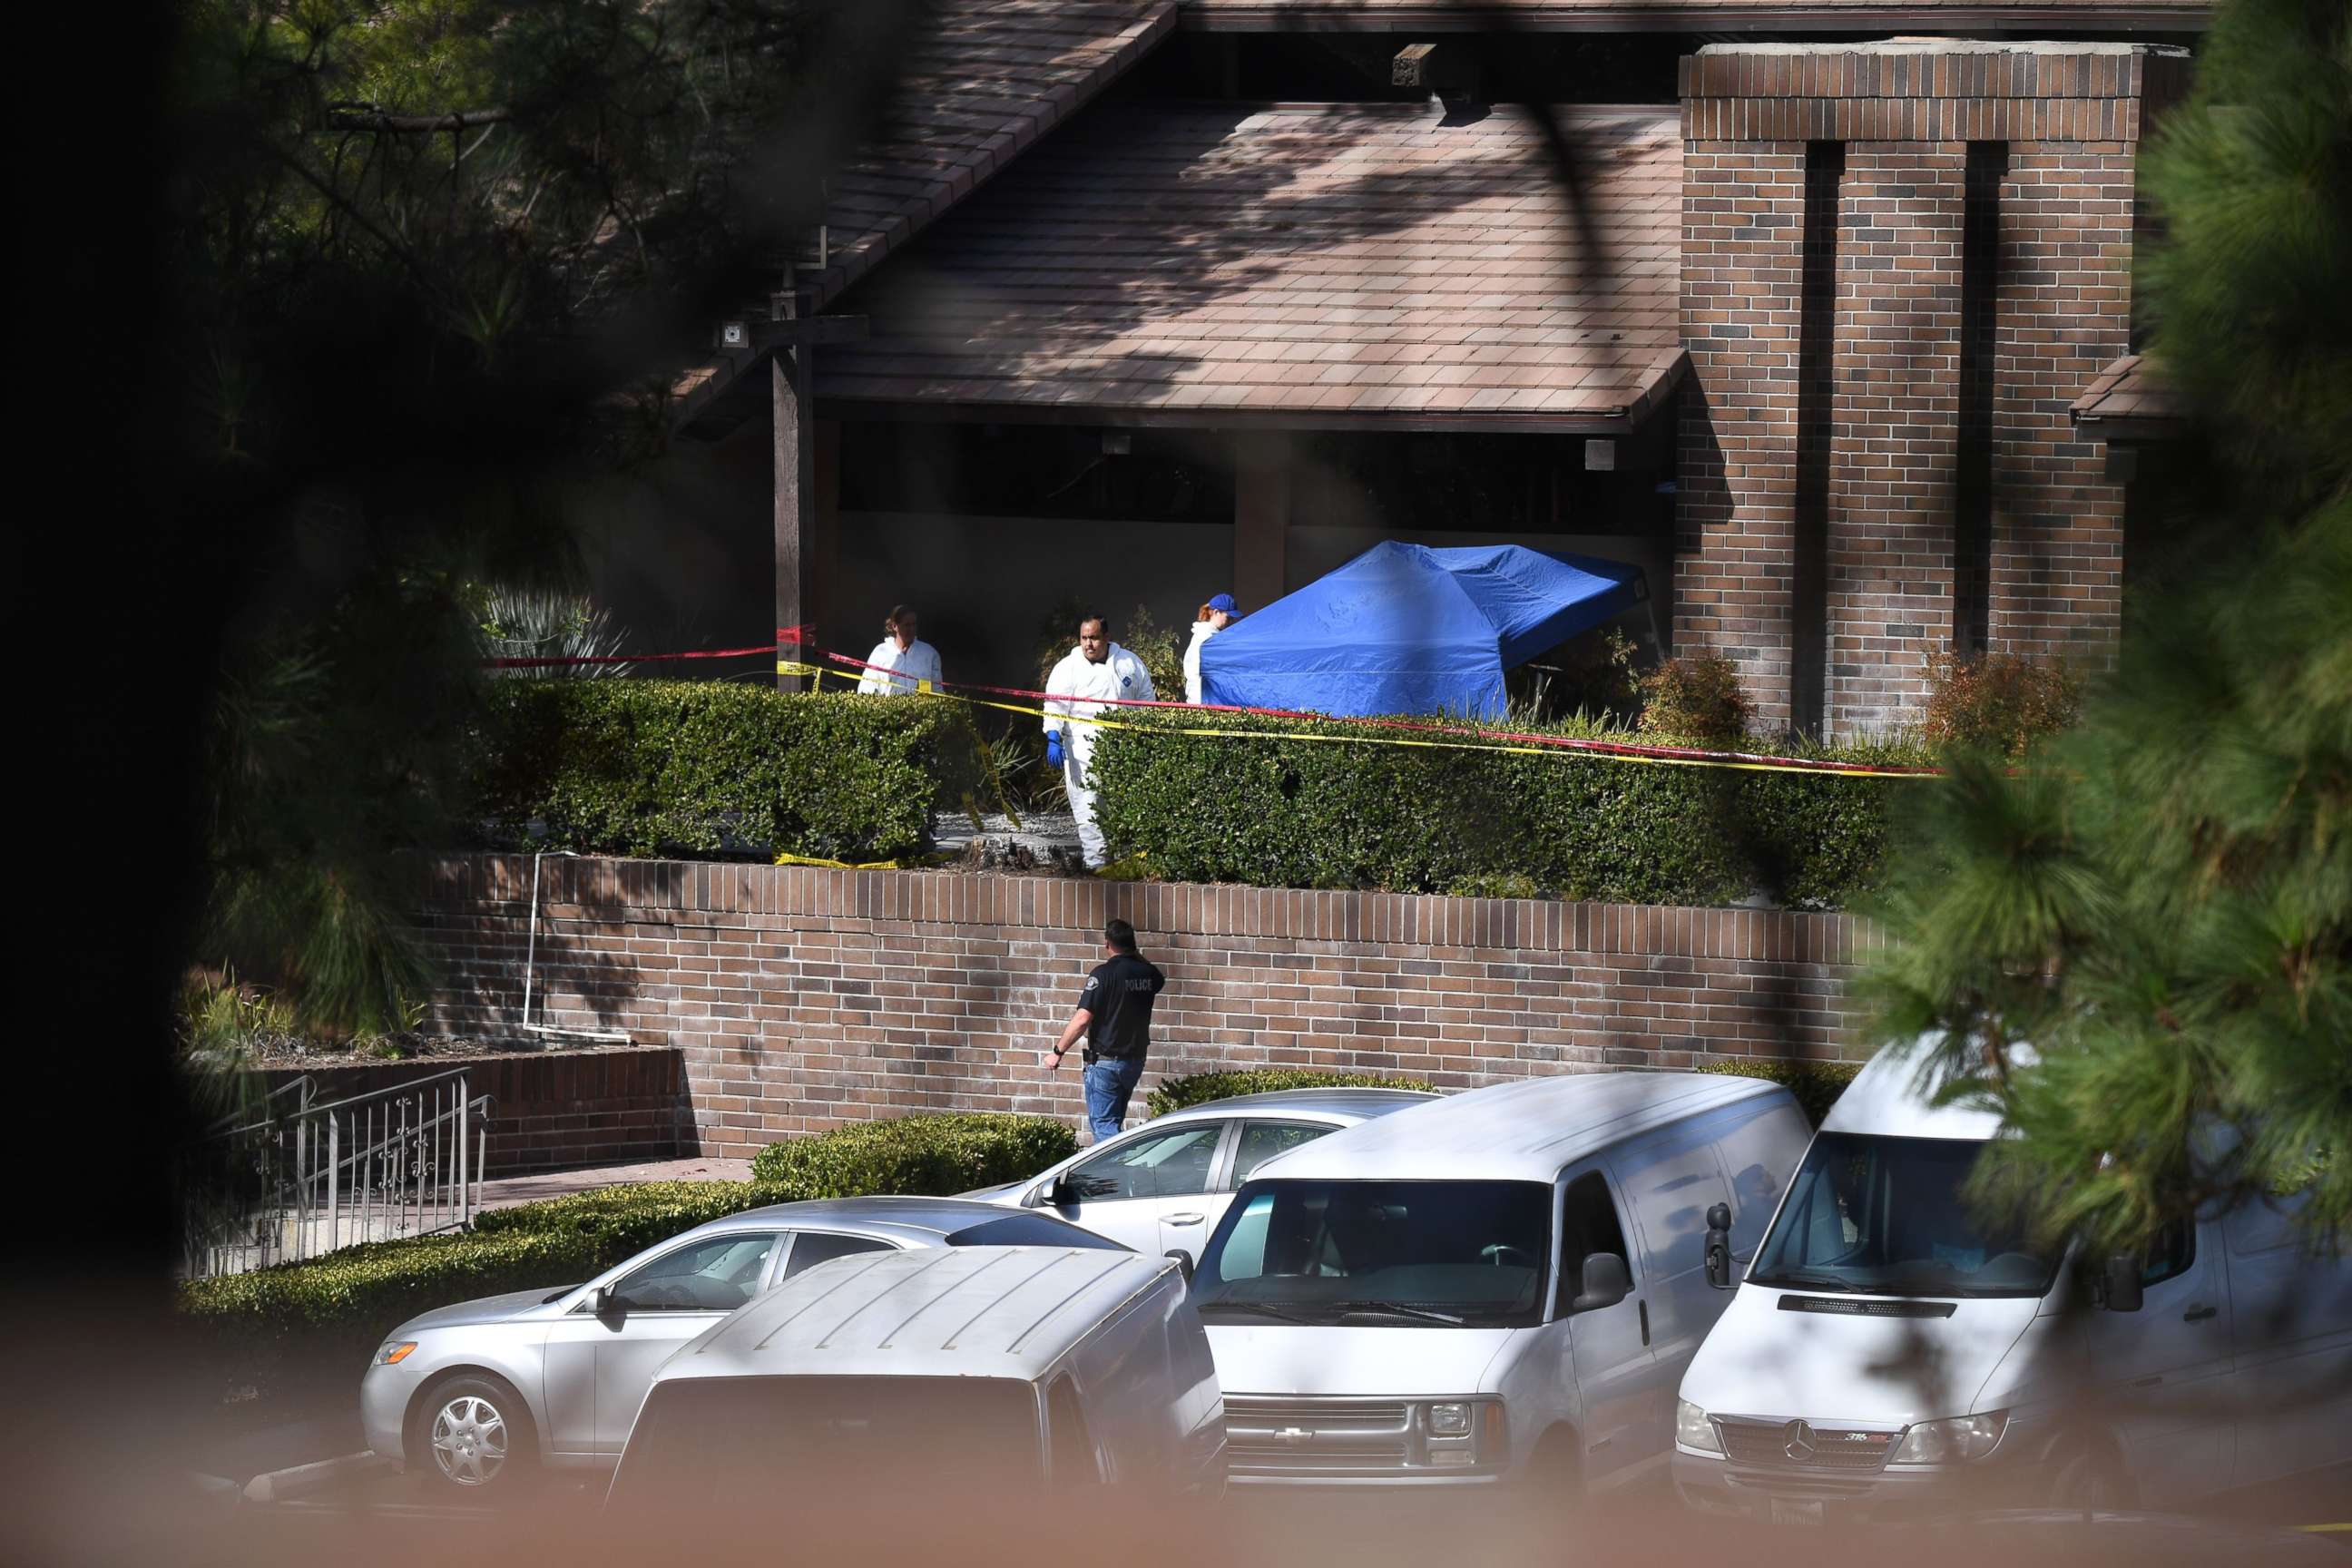 PHOTO: Investigators work at the scene of a mass shooting at the Borderline Bar & Grill in Thousand Oaks, Calif., November 8, 2018. 